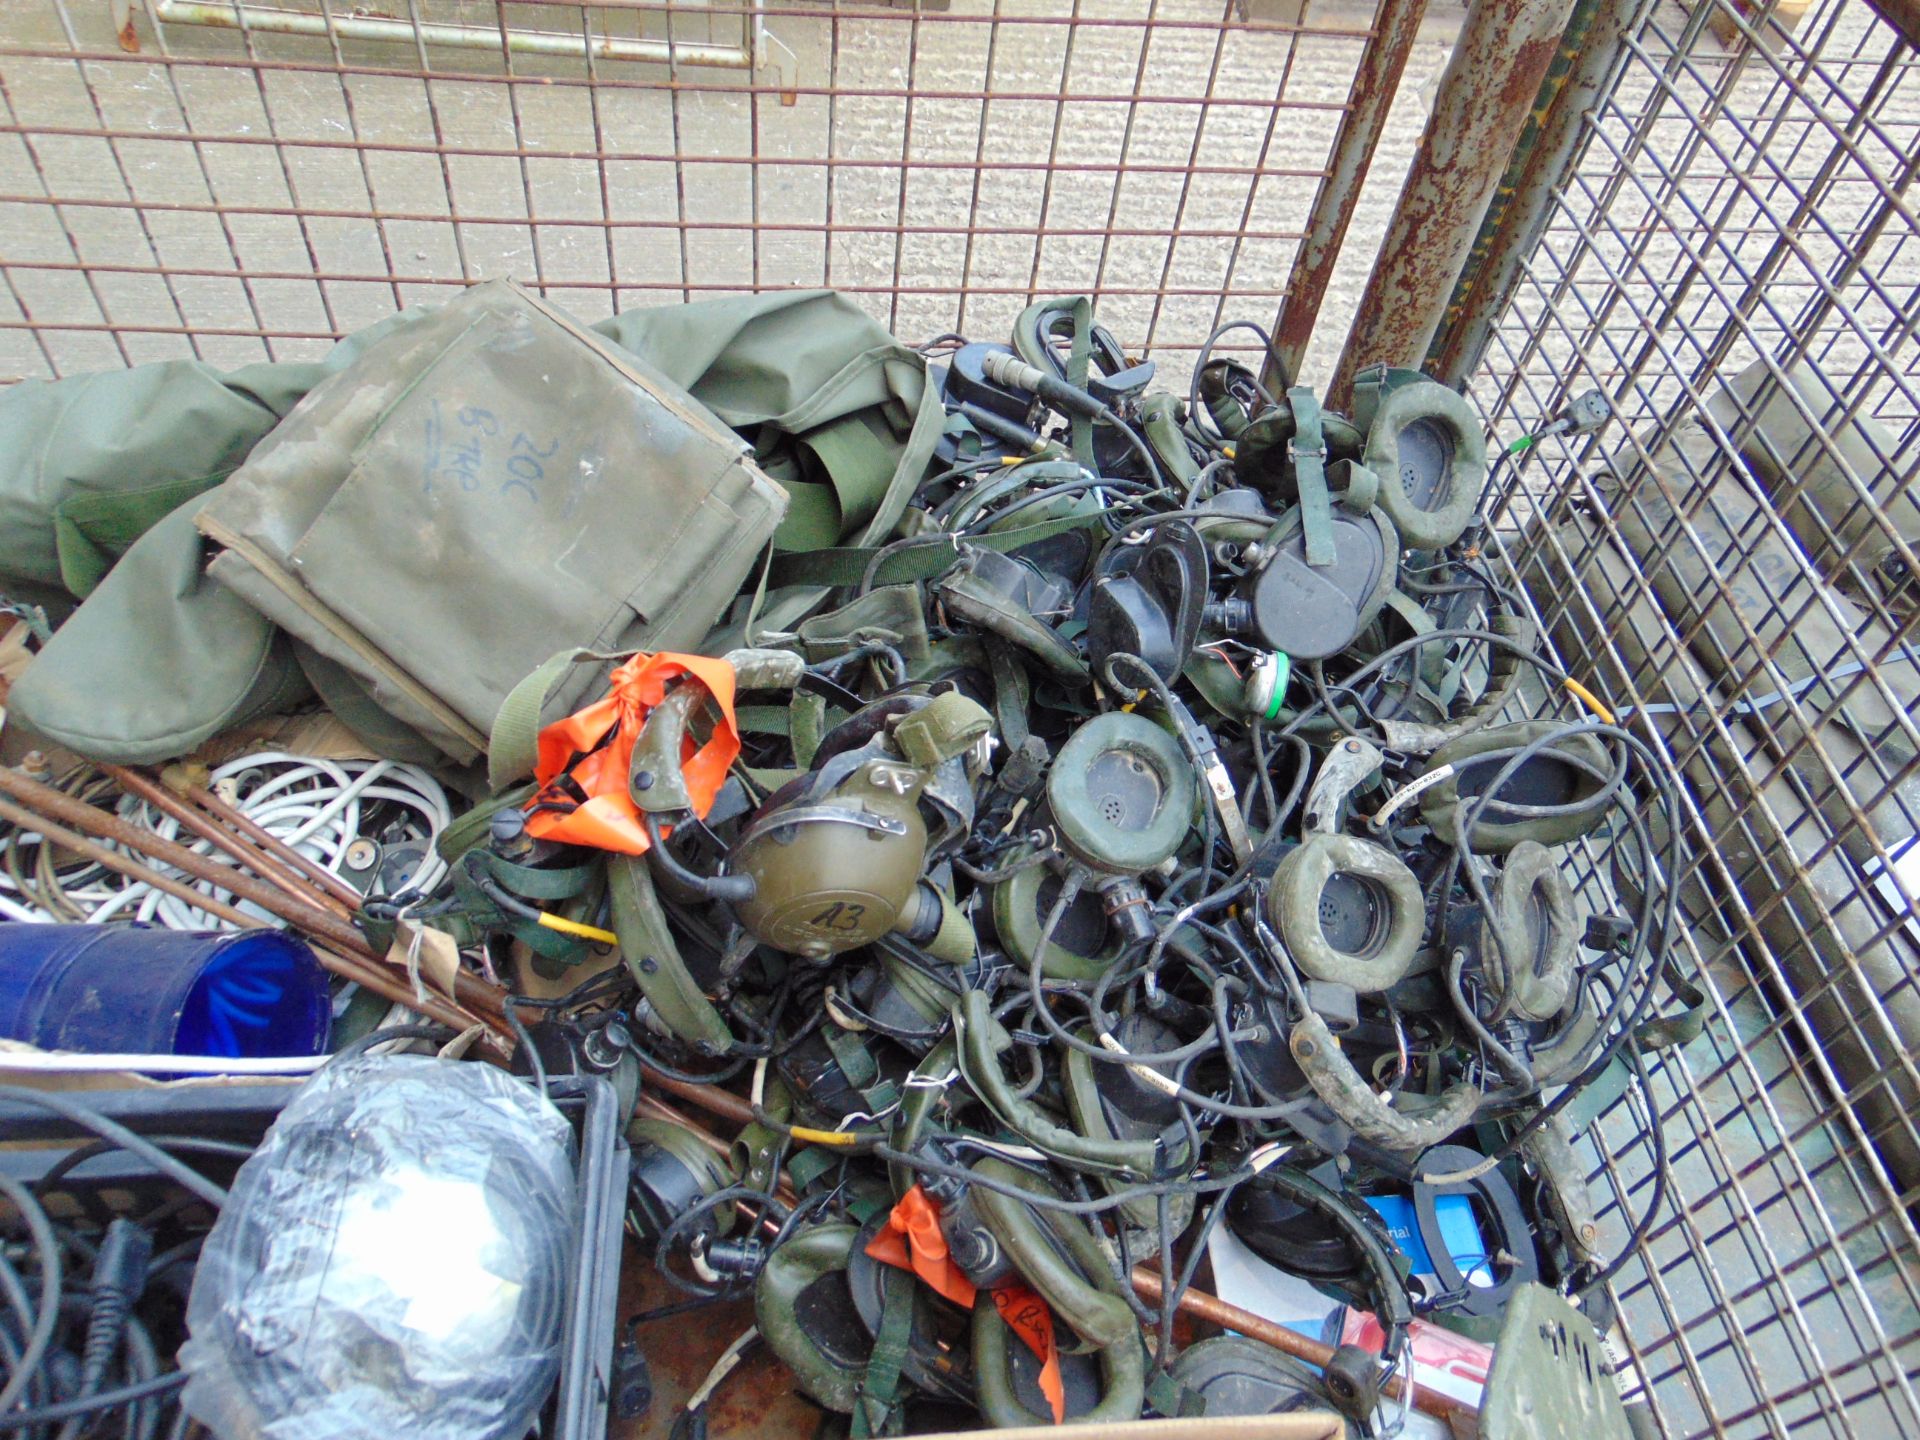 1x Stillage of Clansman Cables Headsets, Antennas Etc - Image 4 of 5